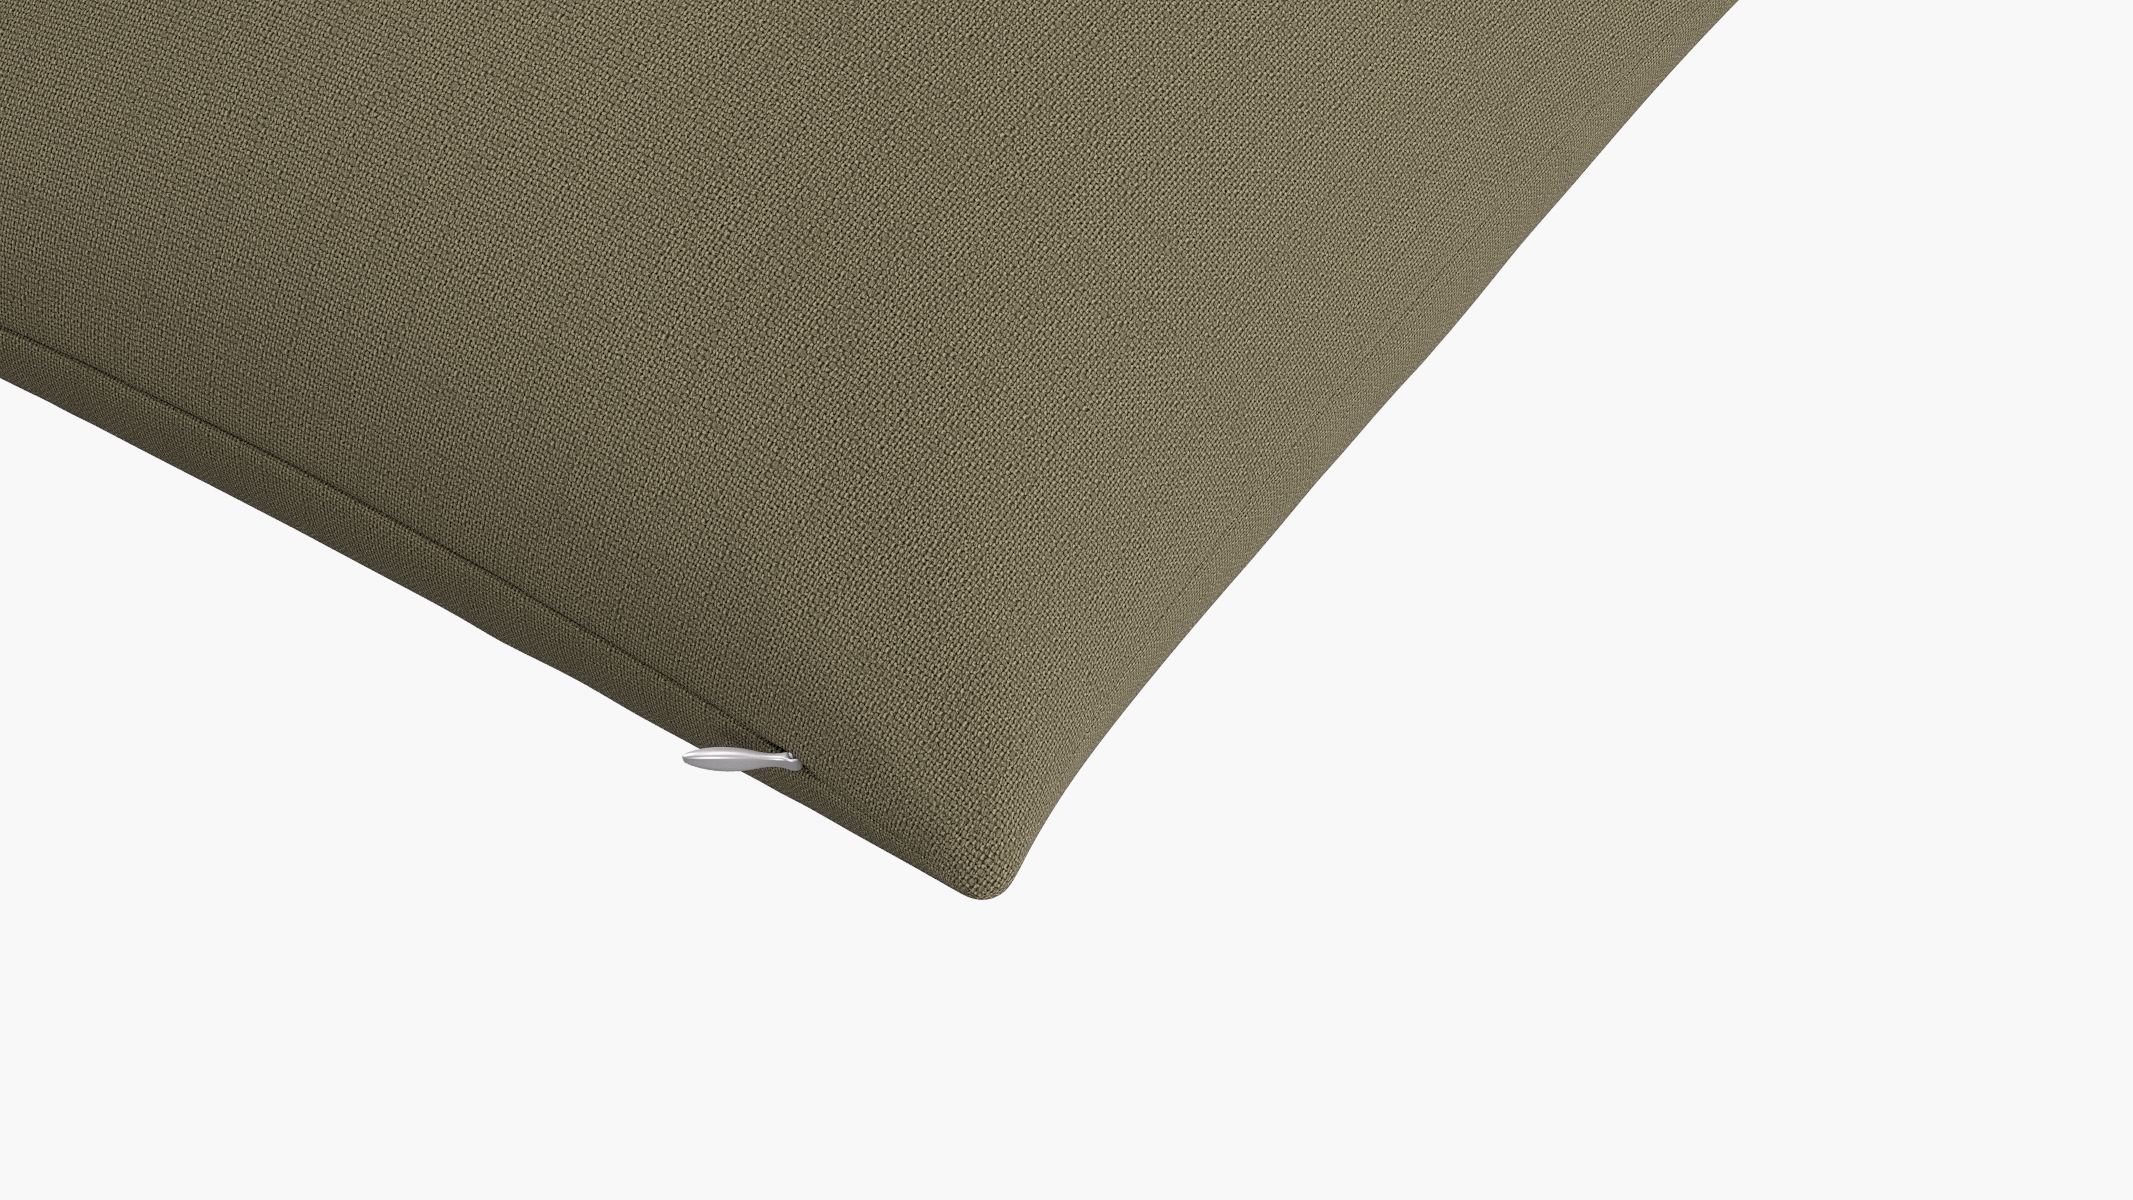 Throw Pillow 18", Olive Everyday Linen, 18" x 18" - Image 1